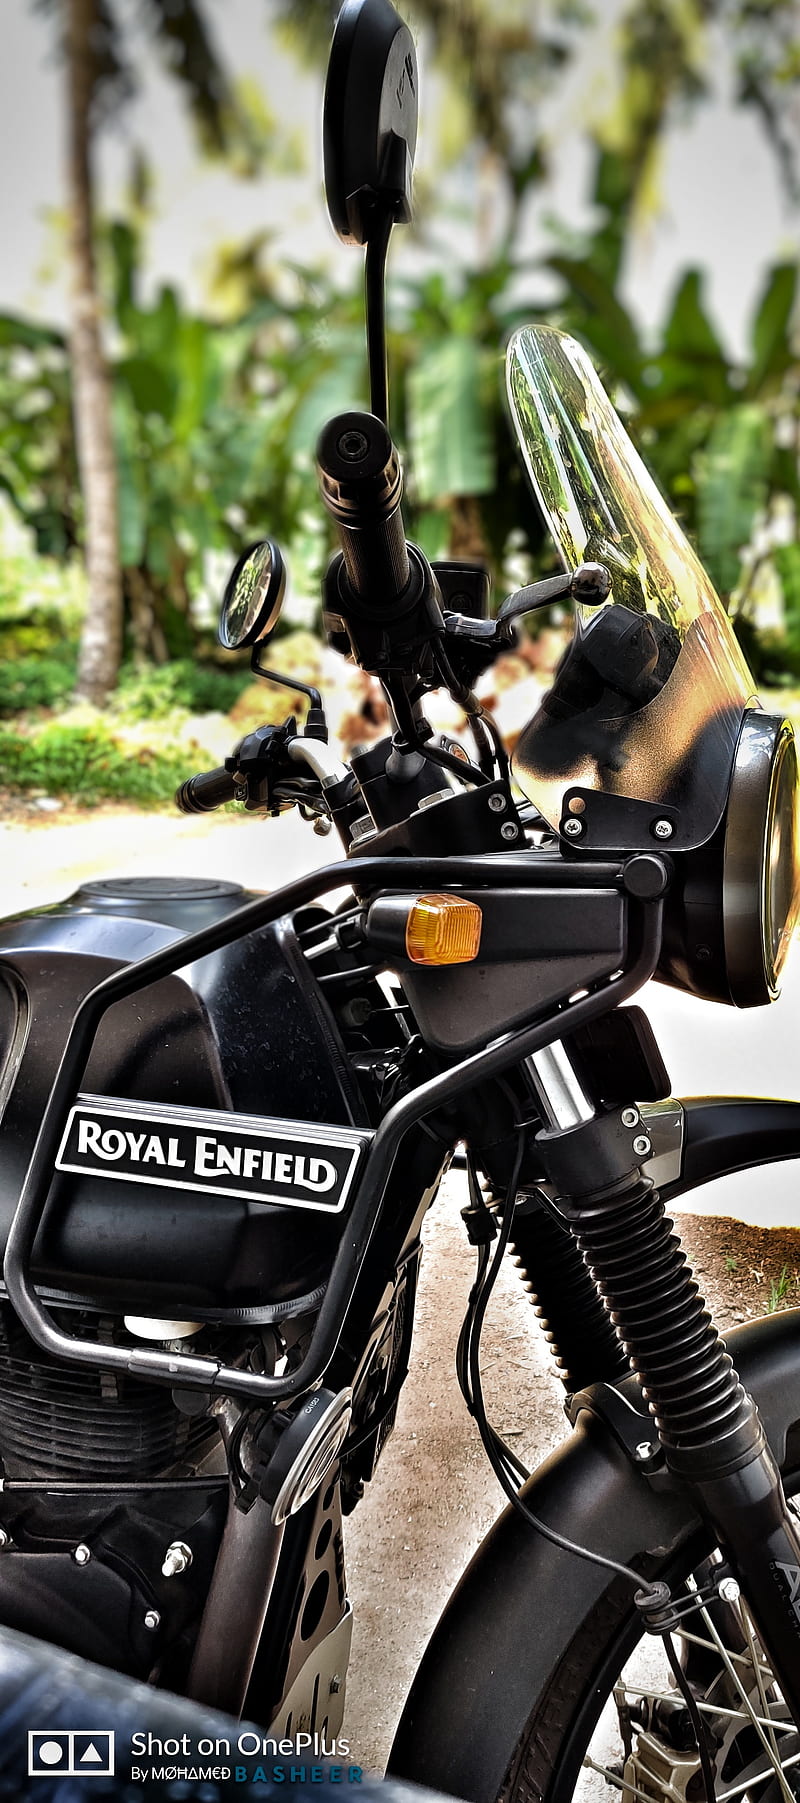 Royal Enfield - Make a splash on all roads and no roads. Explore more:  https://www.royalenfield.com/in/en/motorcycles/himalayan/ #RoyalEnfield  #RidePure #PureMotorcycling #RoyalEnfieldHimalayan #REHimalayan  #AllRoadsNoRoads | Facebook